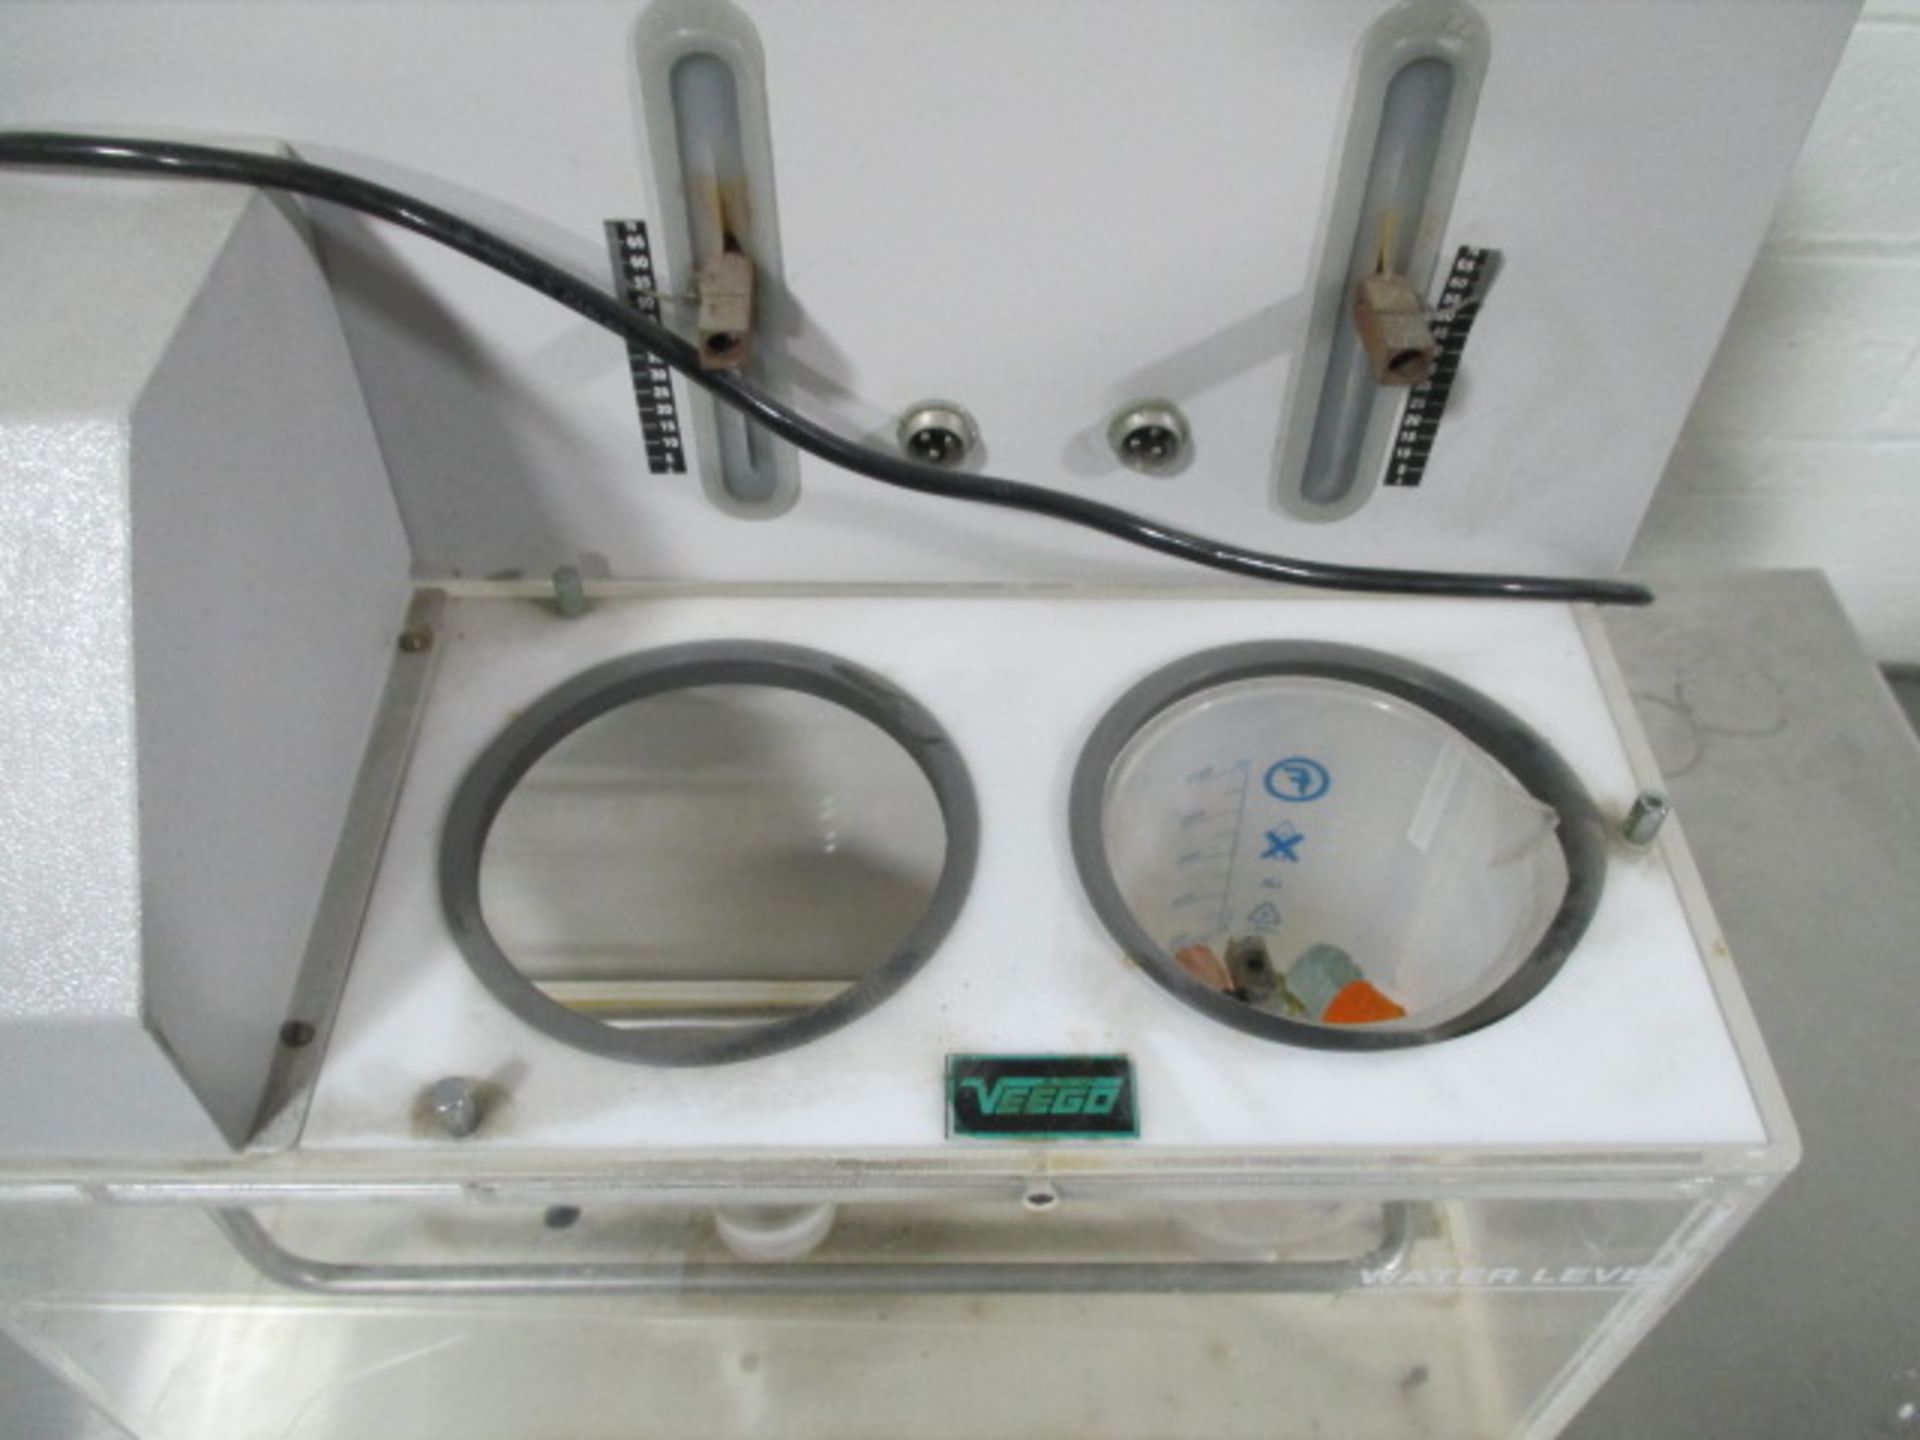 Veego tablet disintegration tester, type VTD-AV, two sample stations, with controls and display, - Image 5 of 8